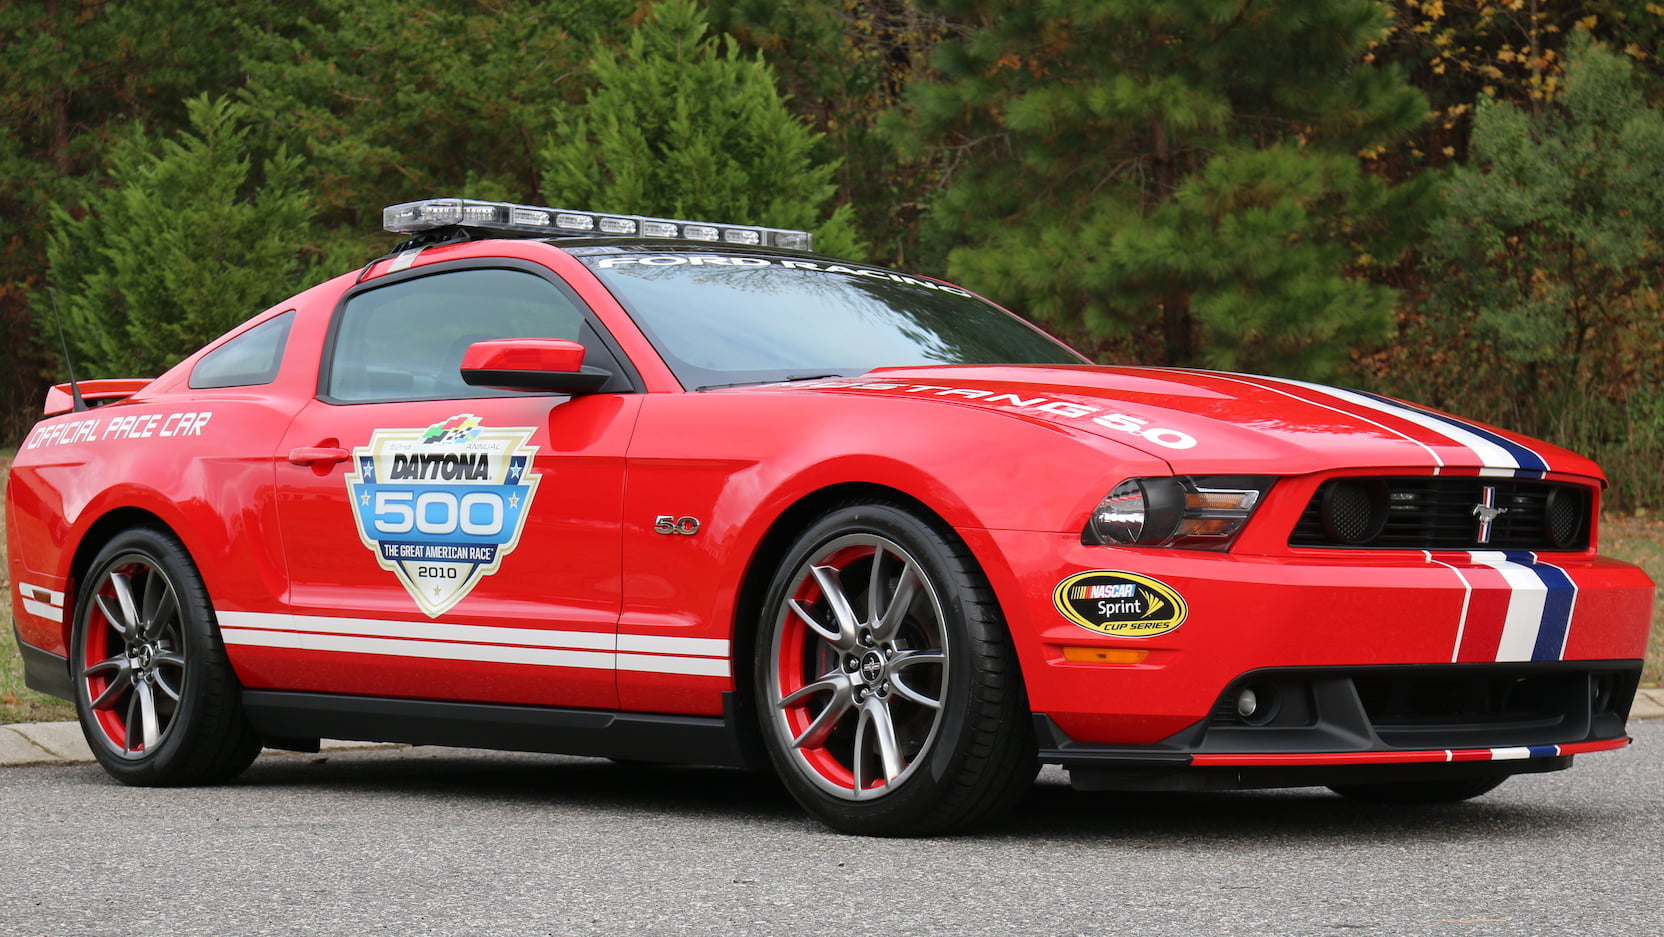 Mustang Of The Day: 2011 Ford Mustang GT Pace Car